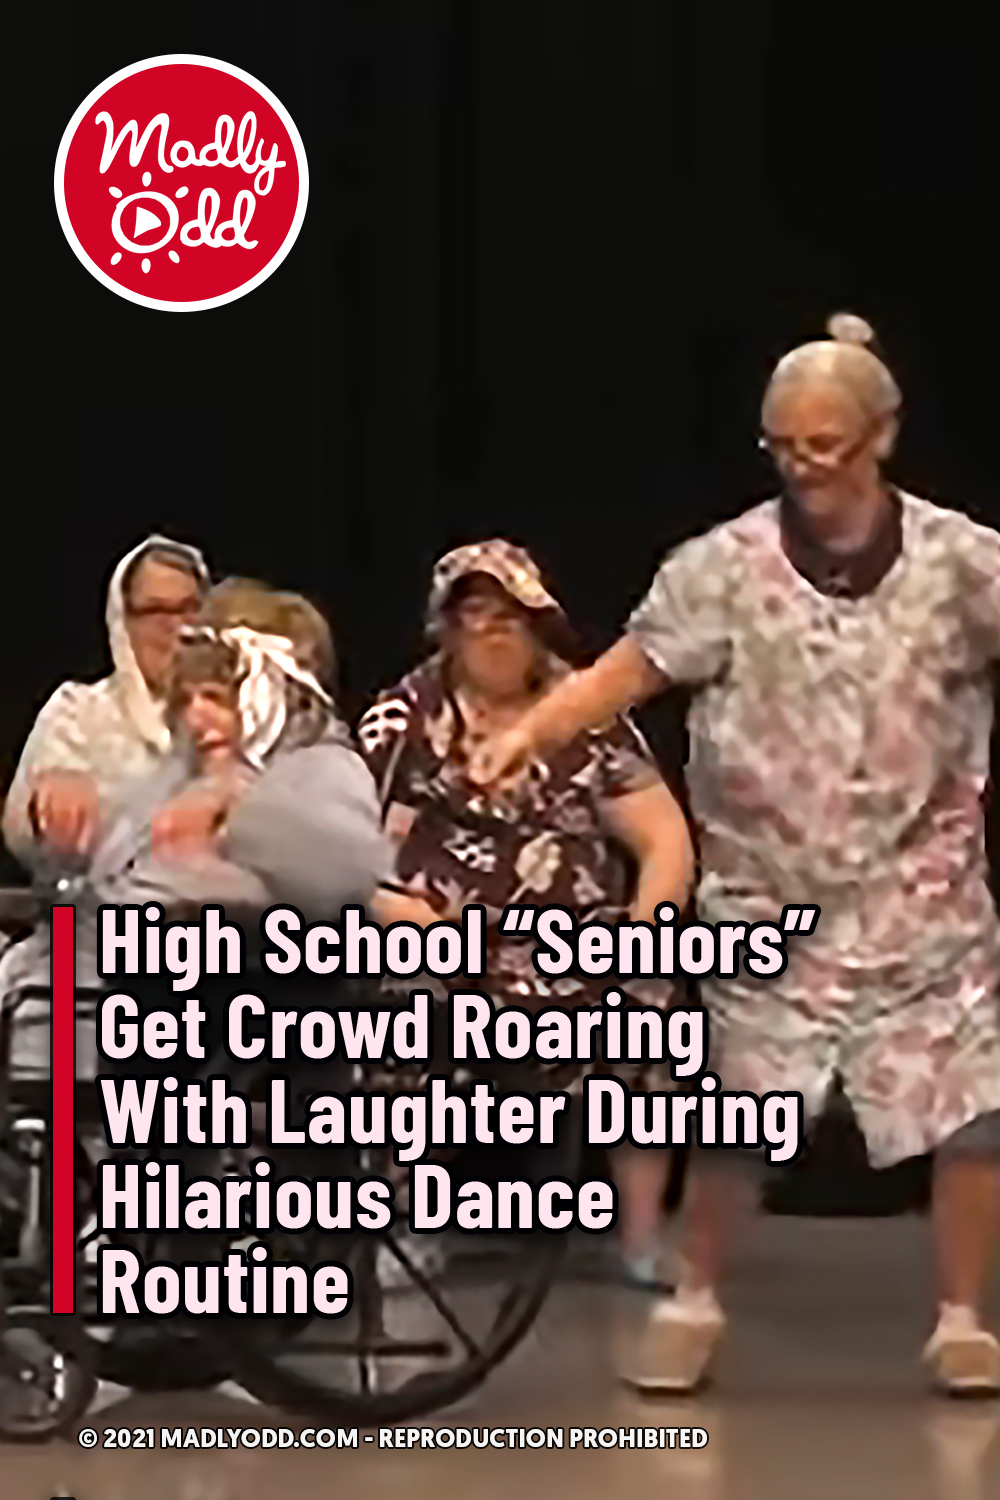 High School “Seniors” Get Crowd Roaring With Laughter During Hilarious Dance Routine